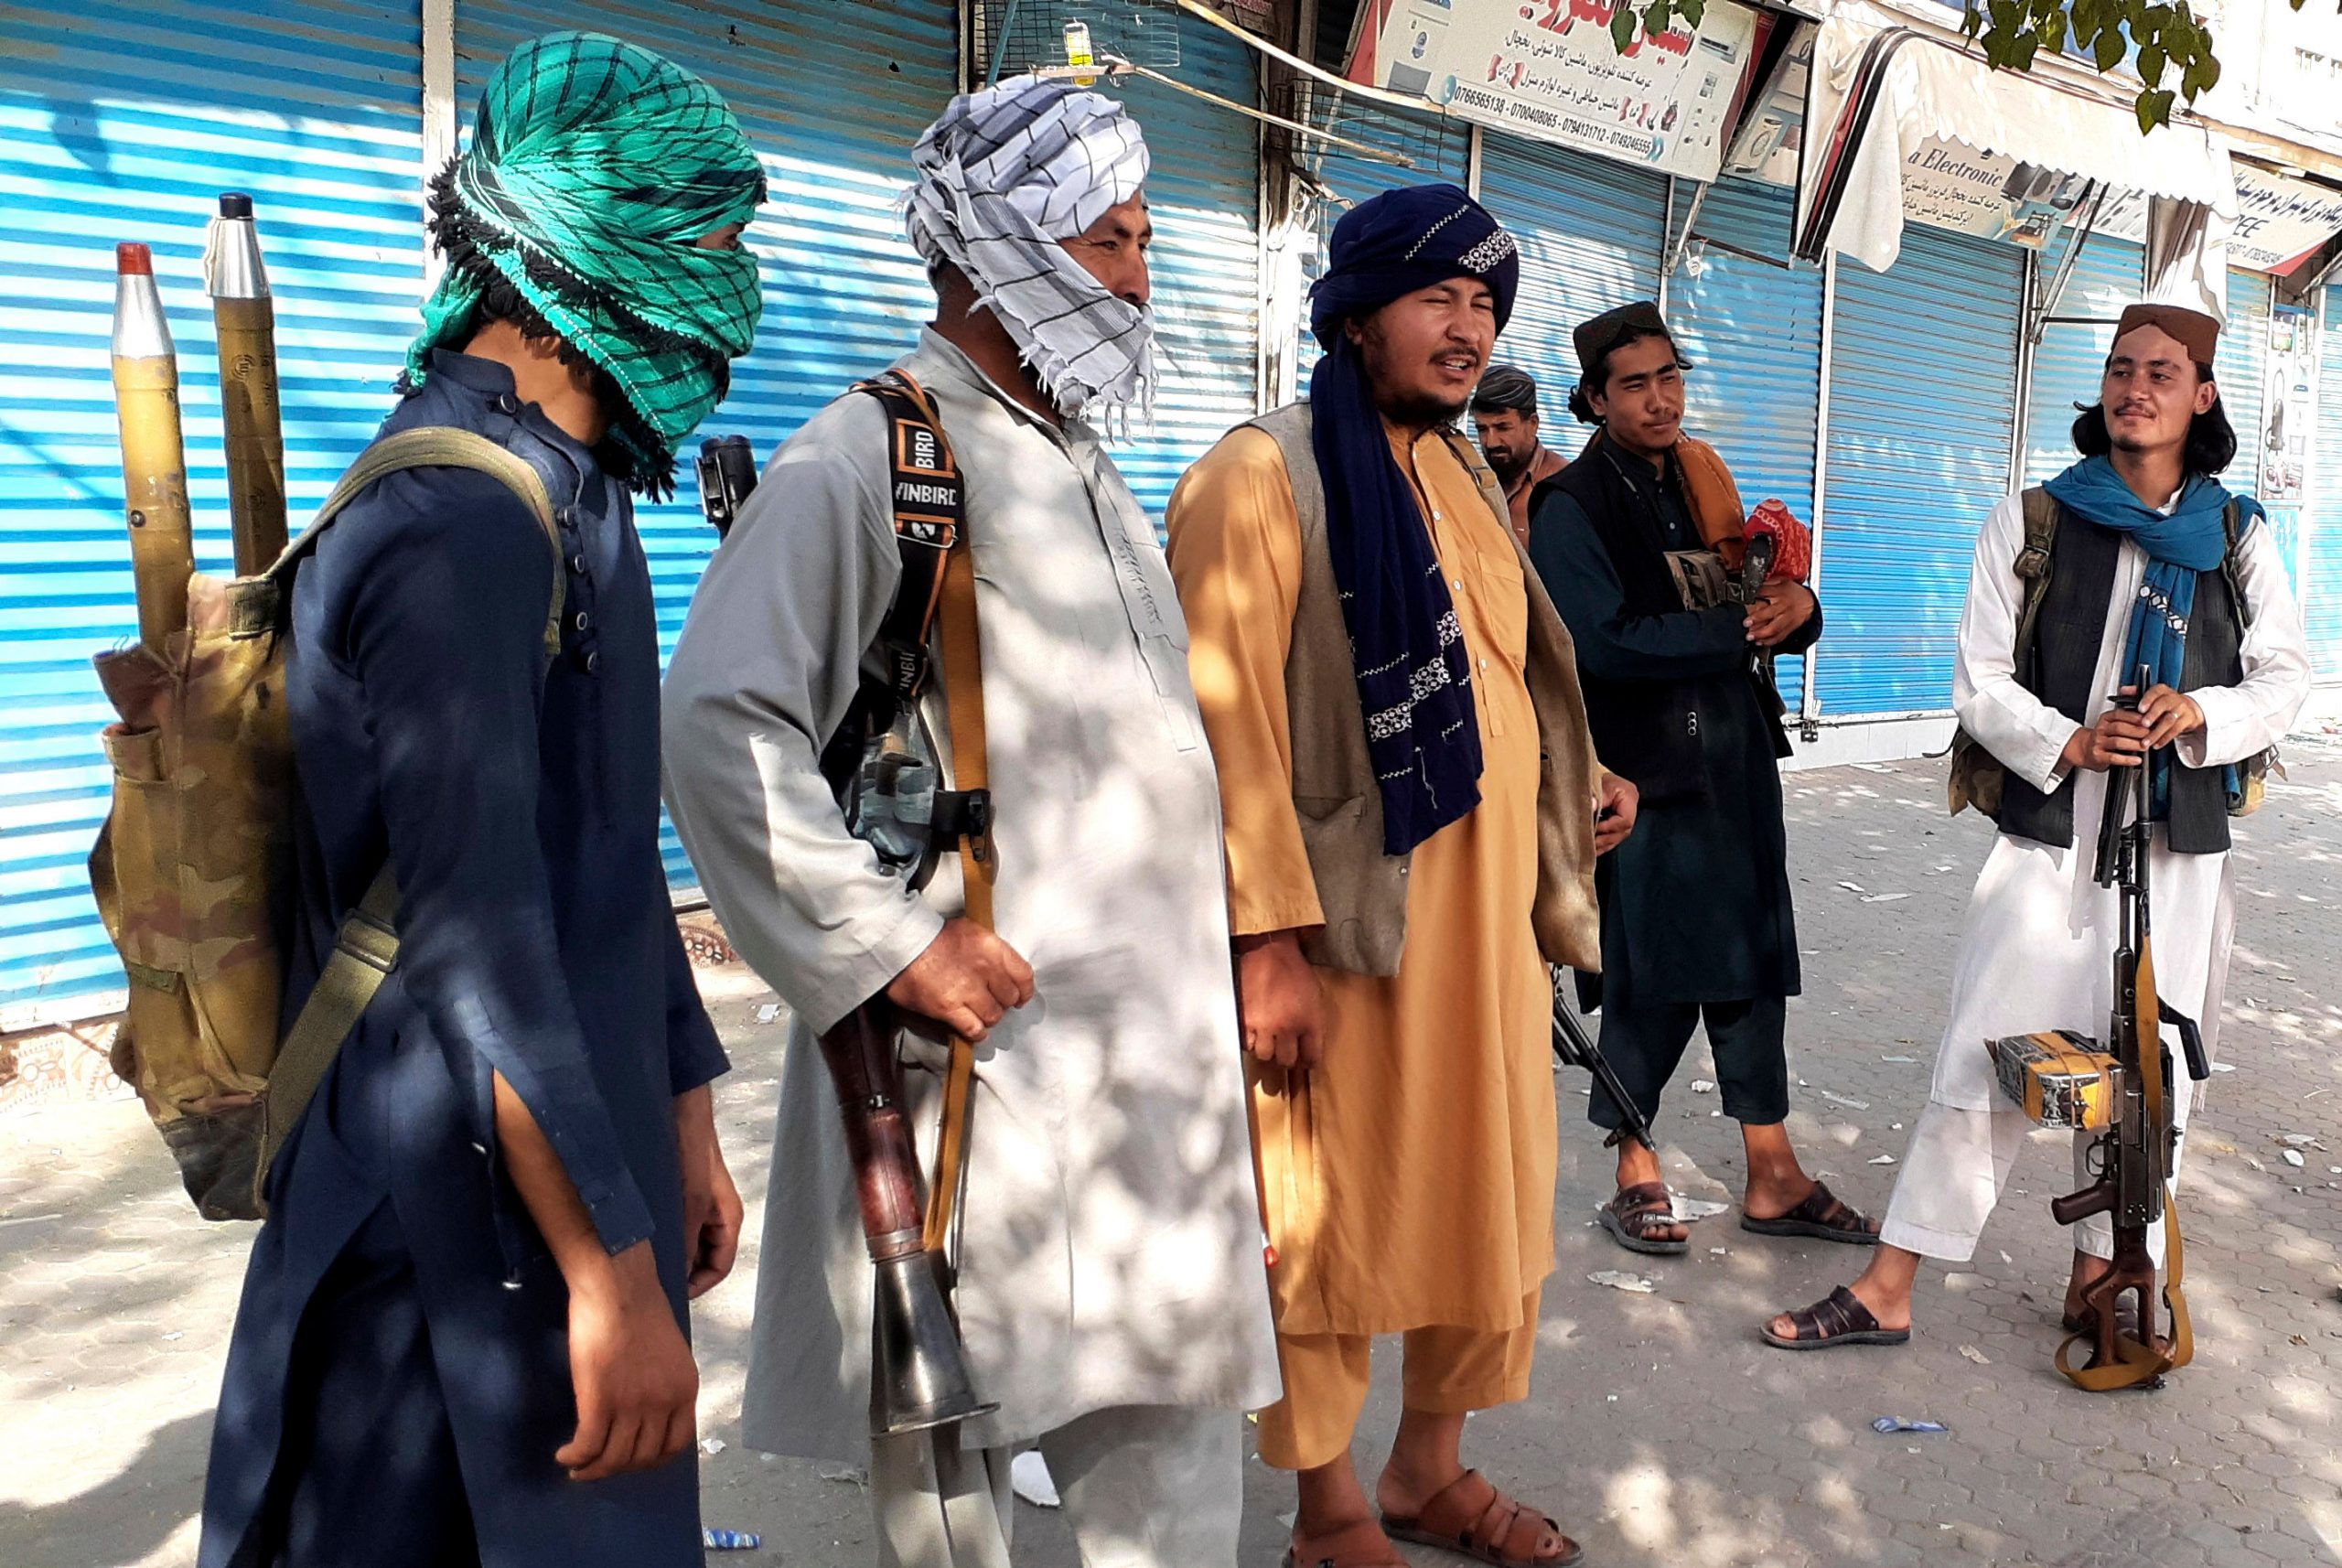 What is Taliban’s worth and their source of revenue?